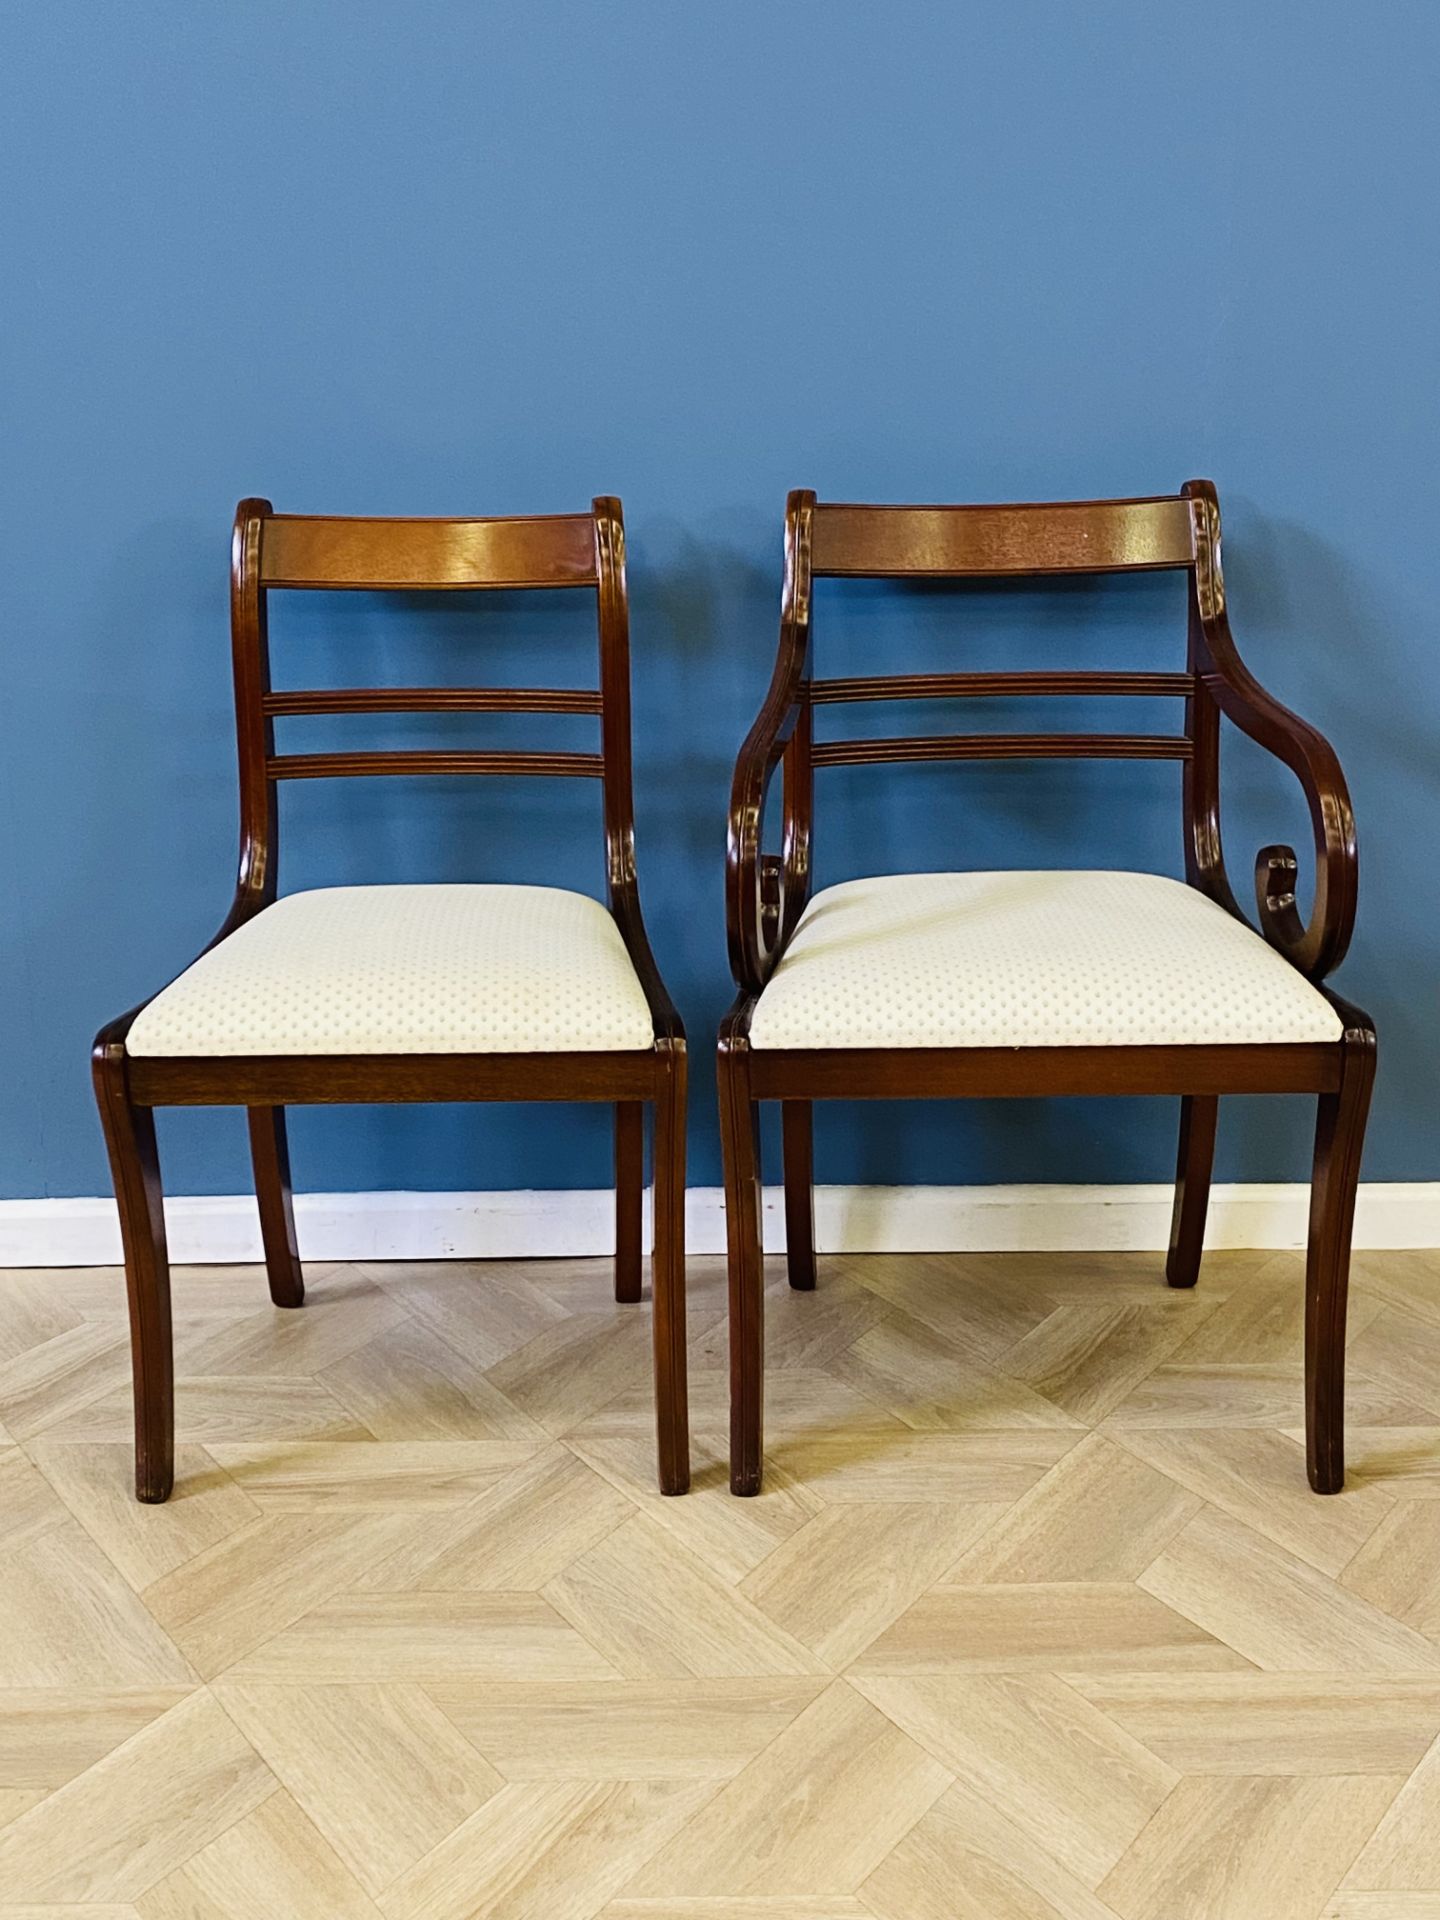 Set of six mahogany Regency style dining chairs - Image 5 of 7